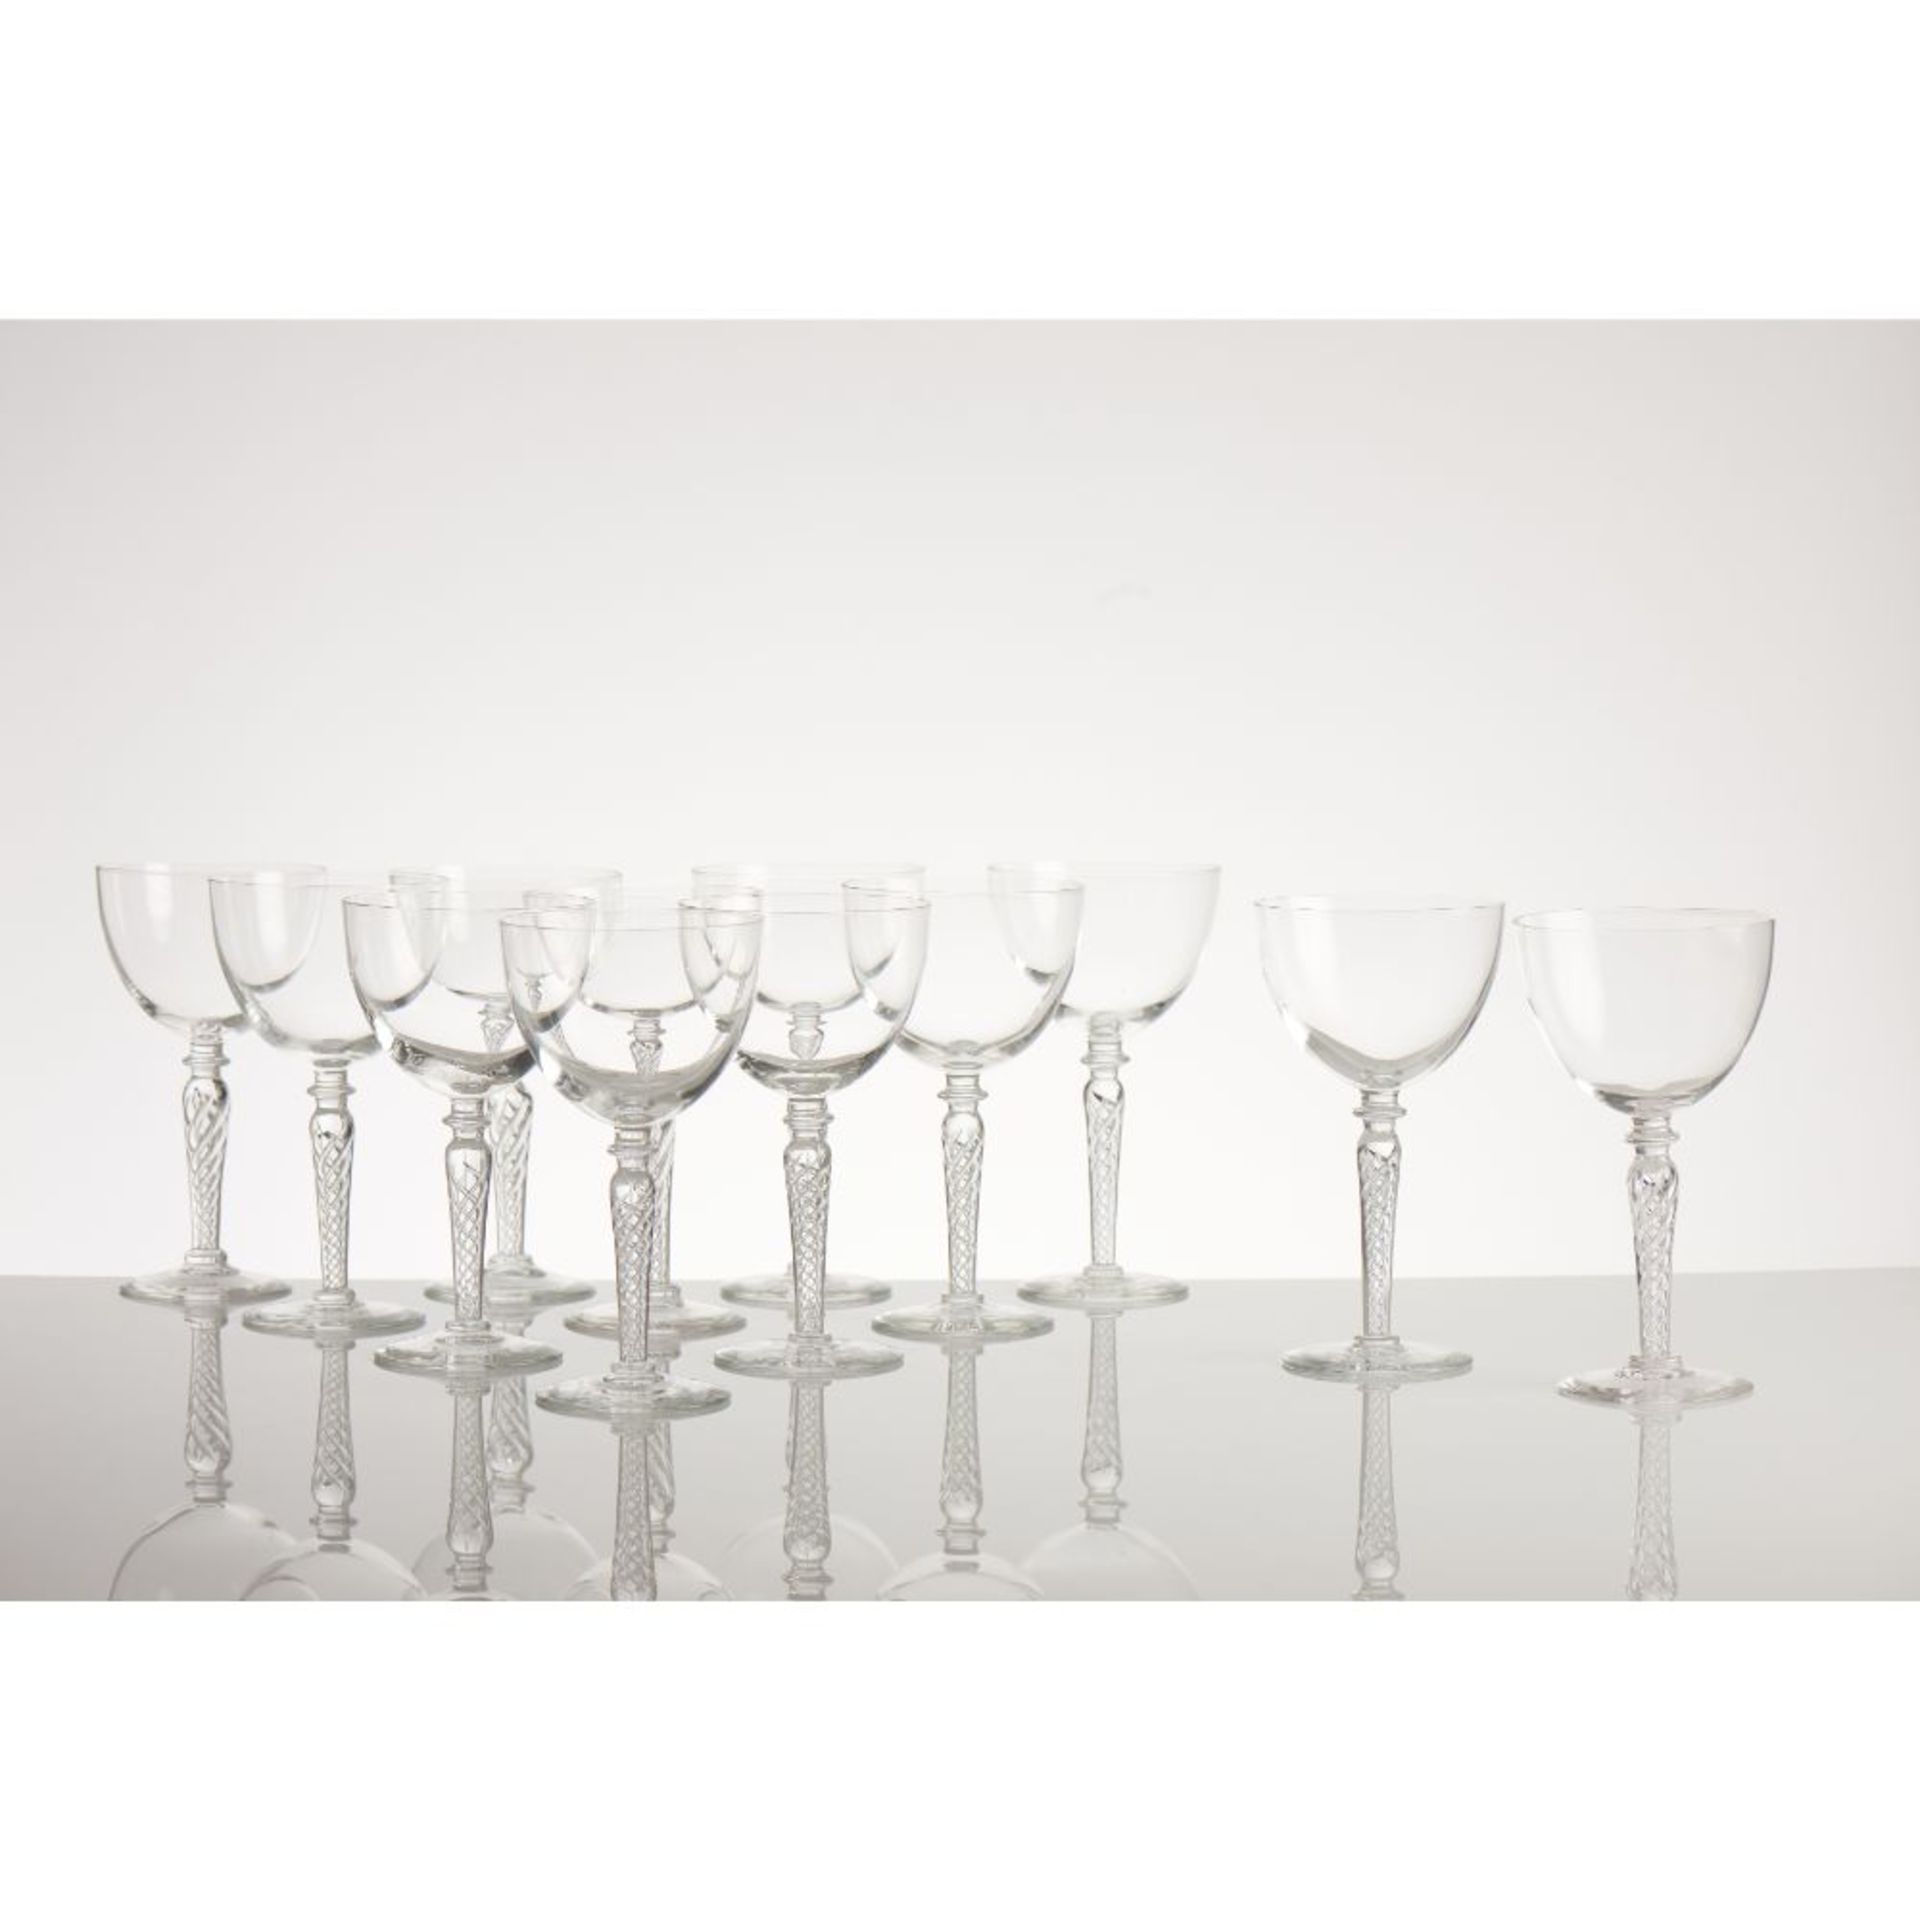 A set of drinking glasses for 12 - Image 2 of 2